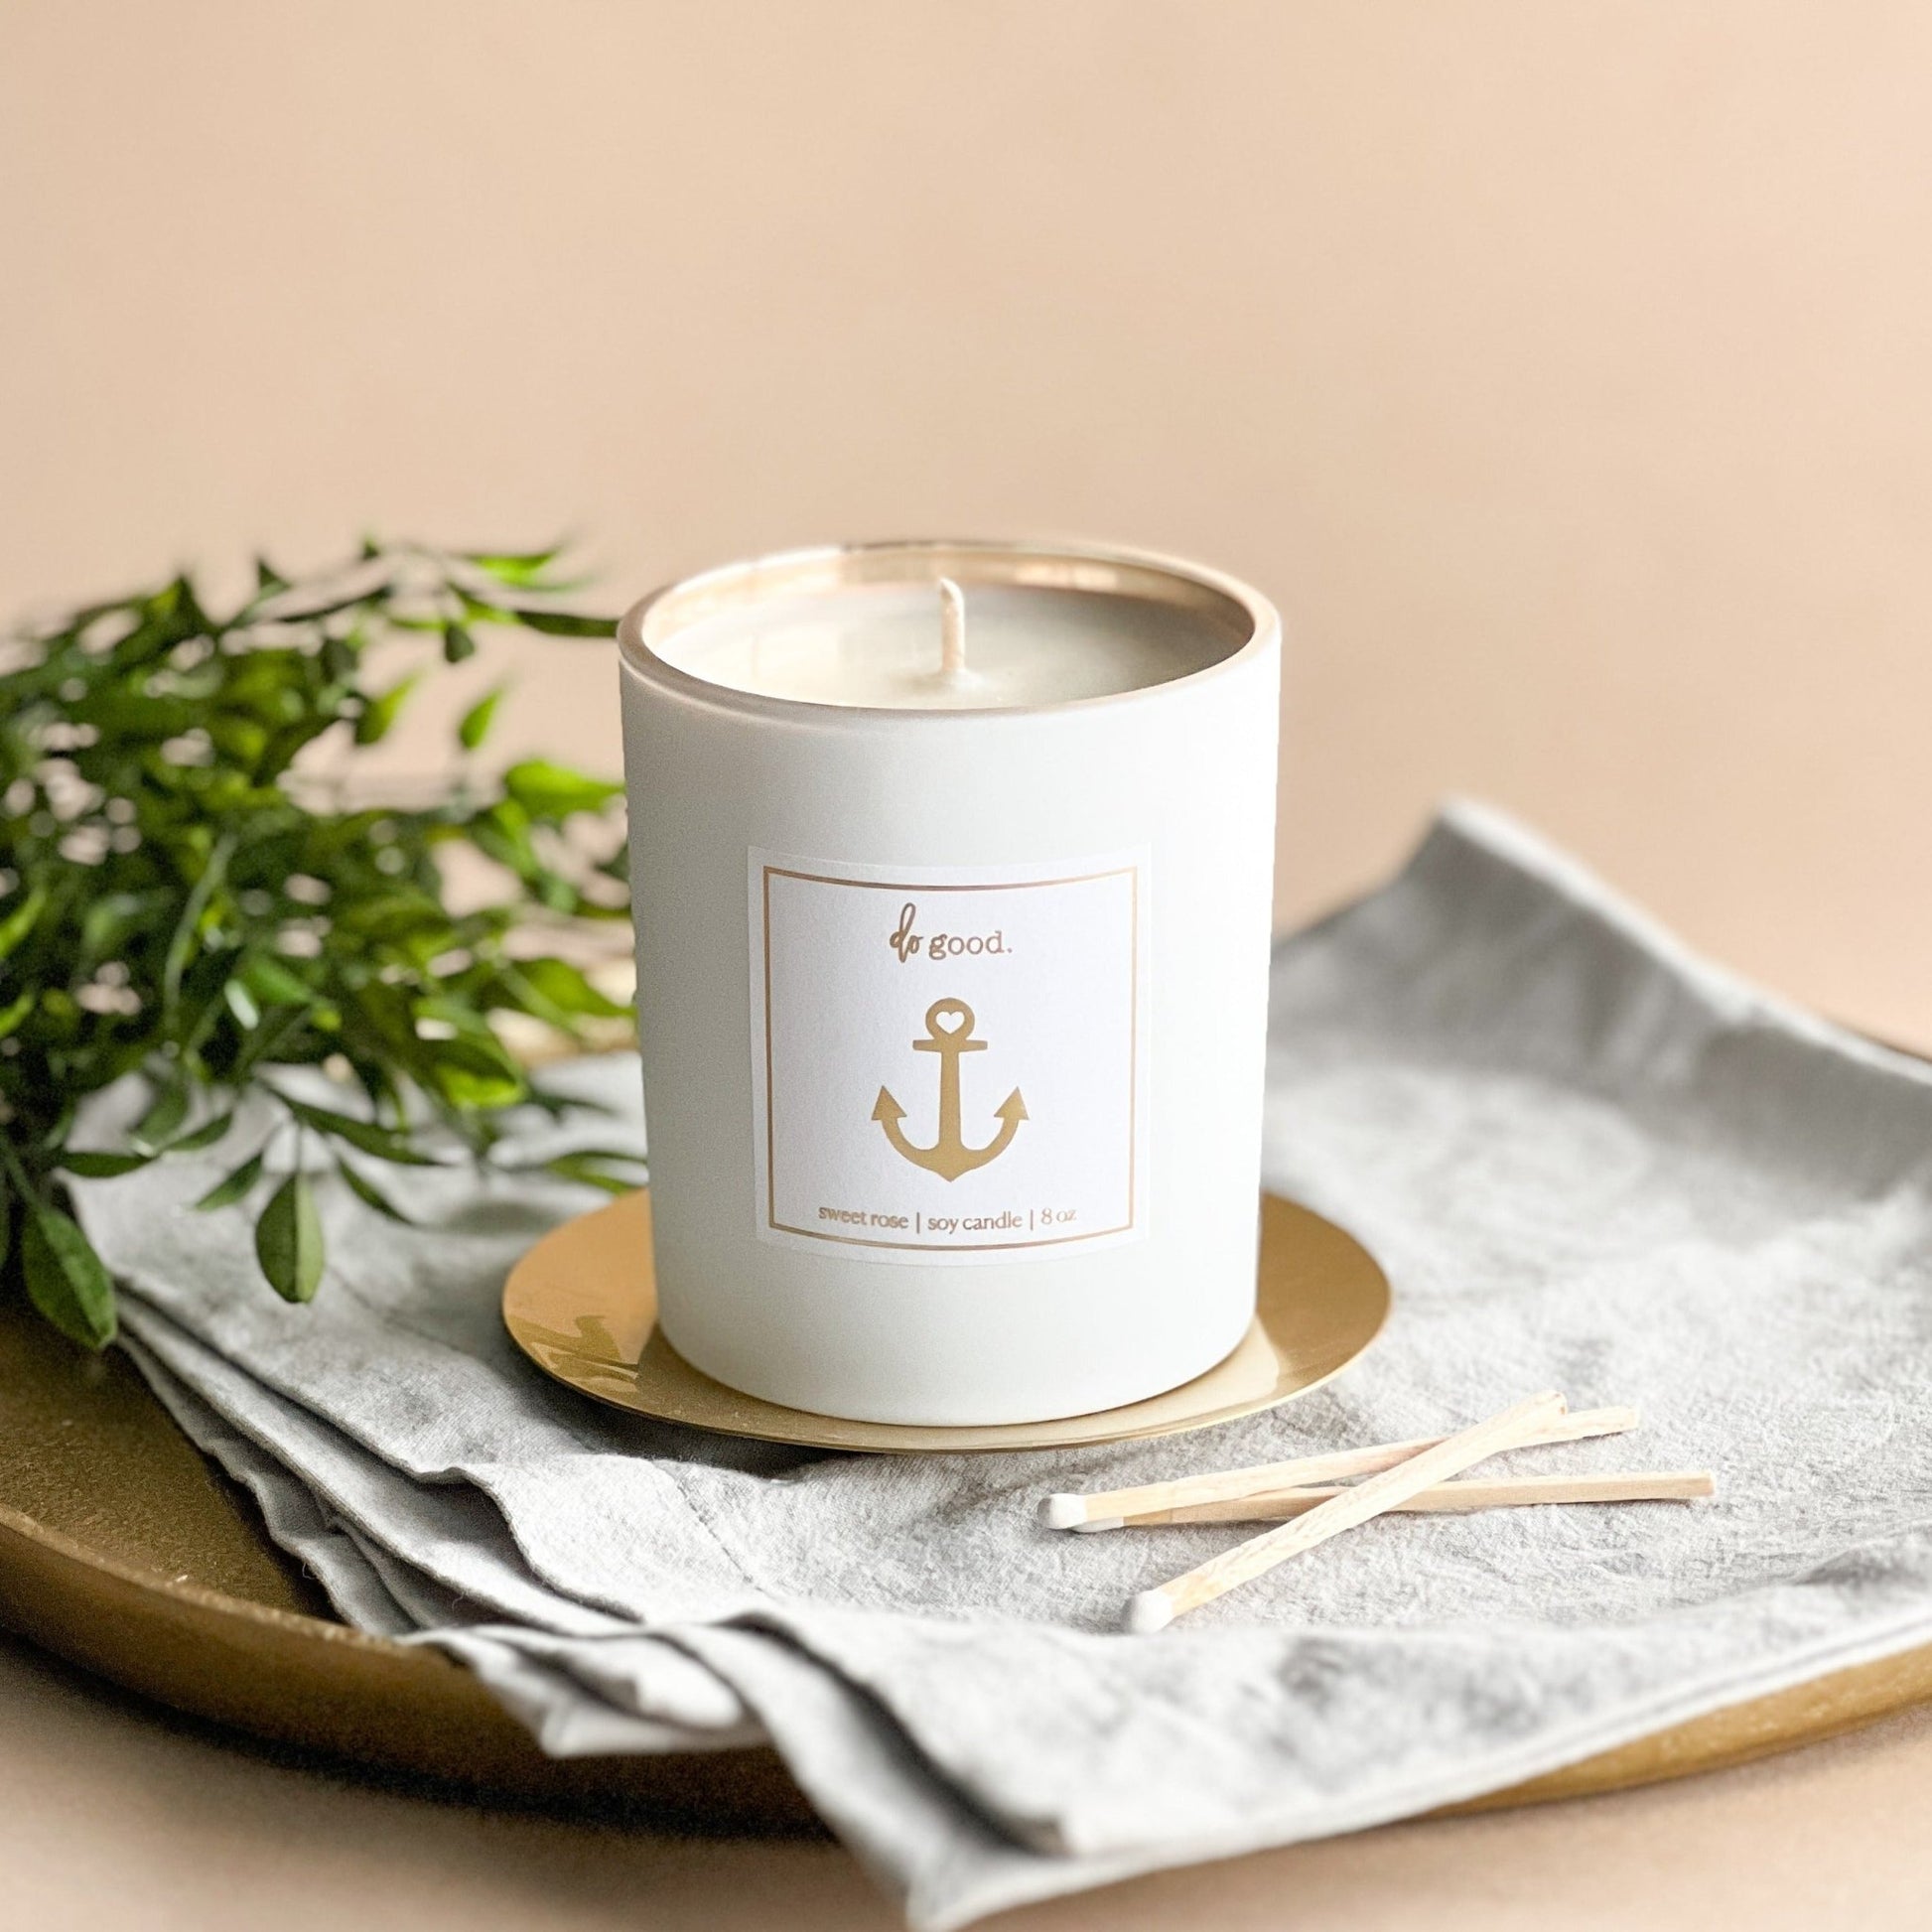 sweet rose anchor soy candle - do good adventures